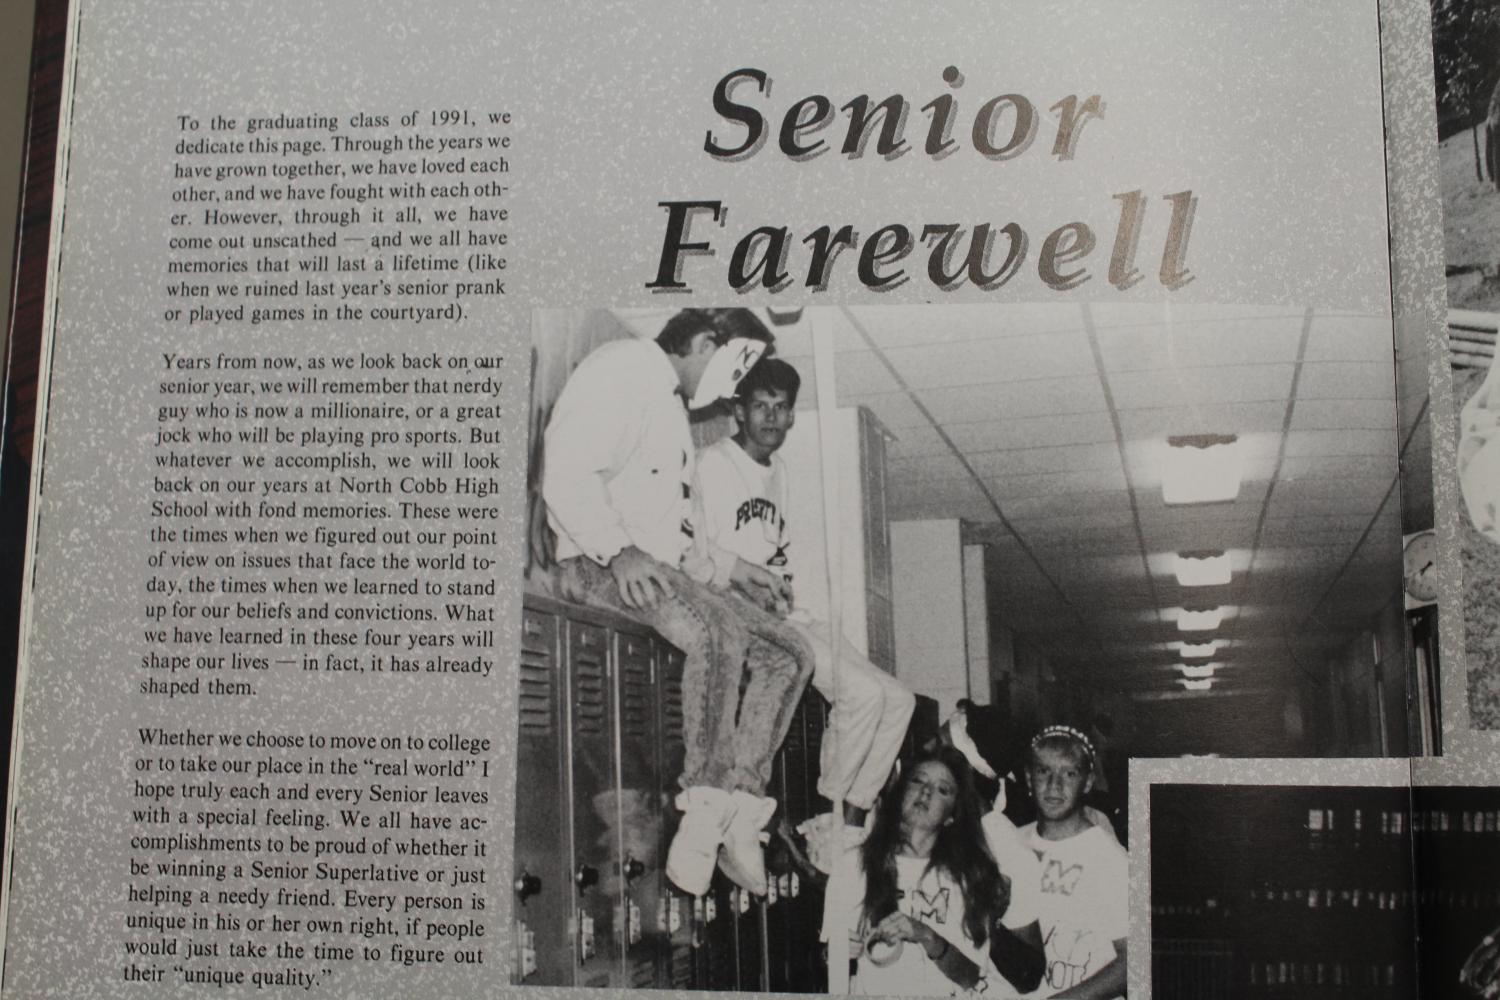 The 33rd volume of the NC Panorama yearbook features the class of 91 seniors in a collage of pictures and a short farewell letter. The letter illustrates the memories made together and reminds them that no matter where they go they will always be a warrior.  